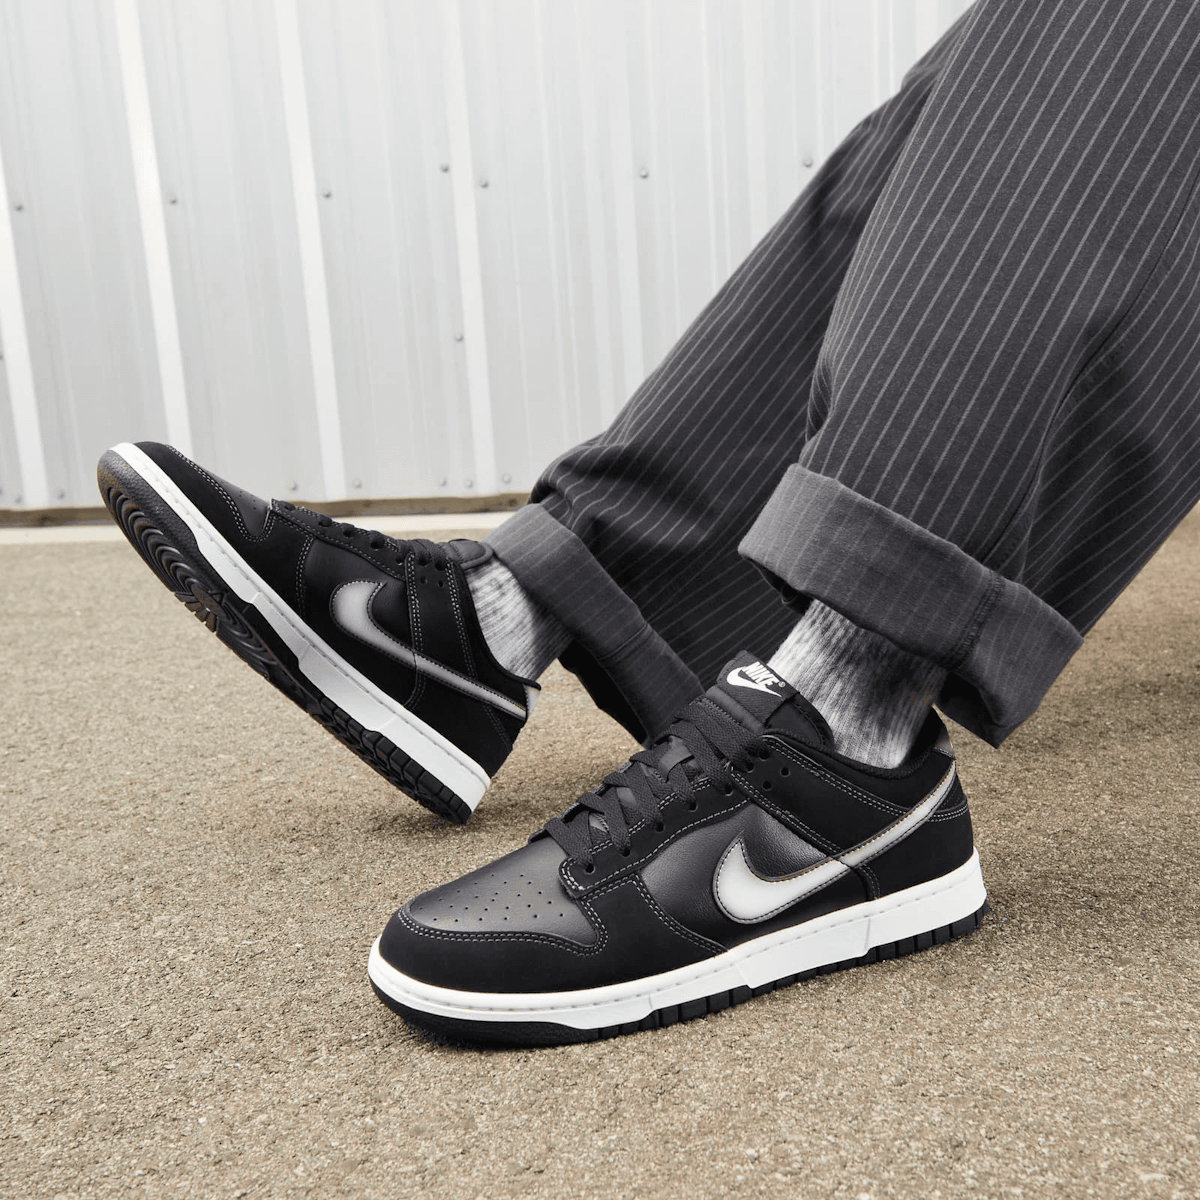 Nike Dunk Low Black White Anthracite - FD6923-001 Raffles and